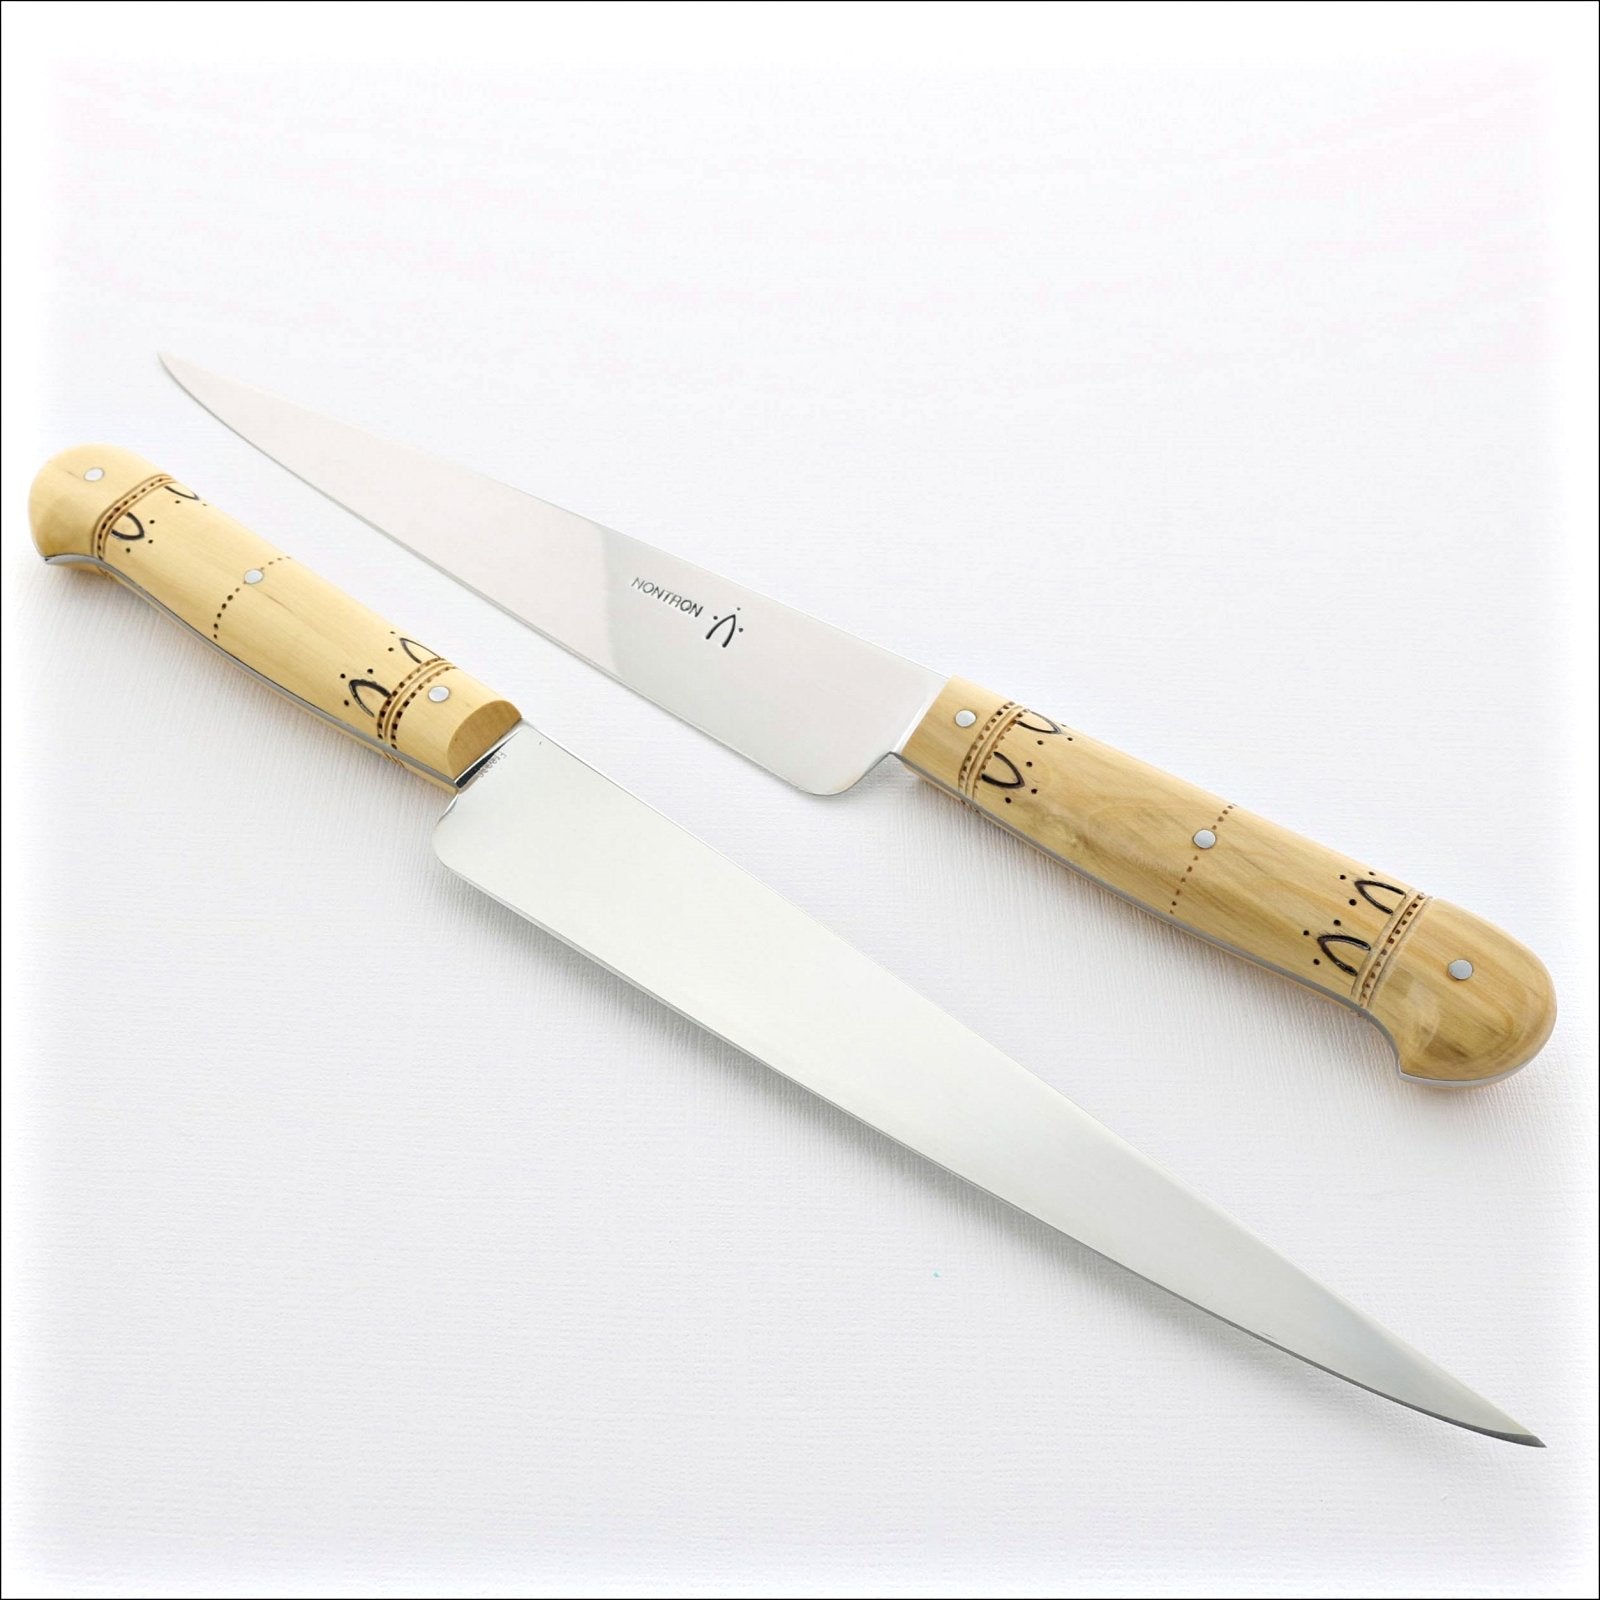 Nontron 8" Carving Knife Boxwood Handle